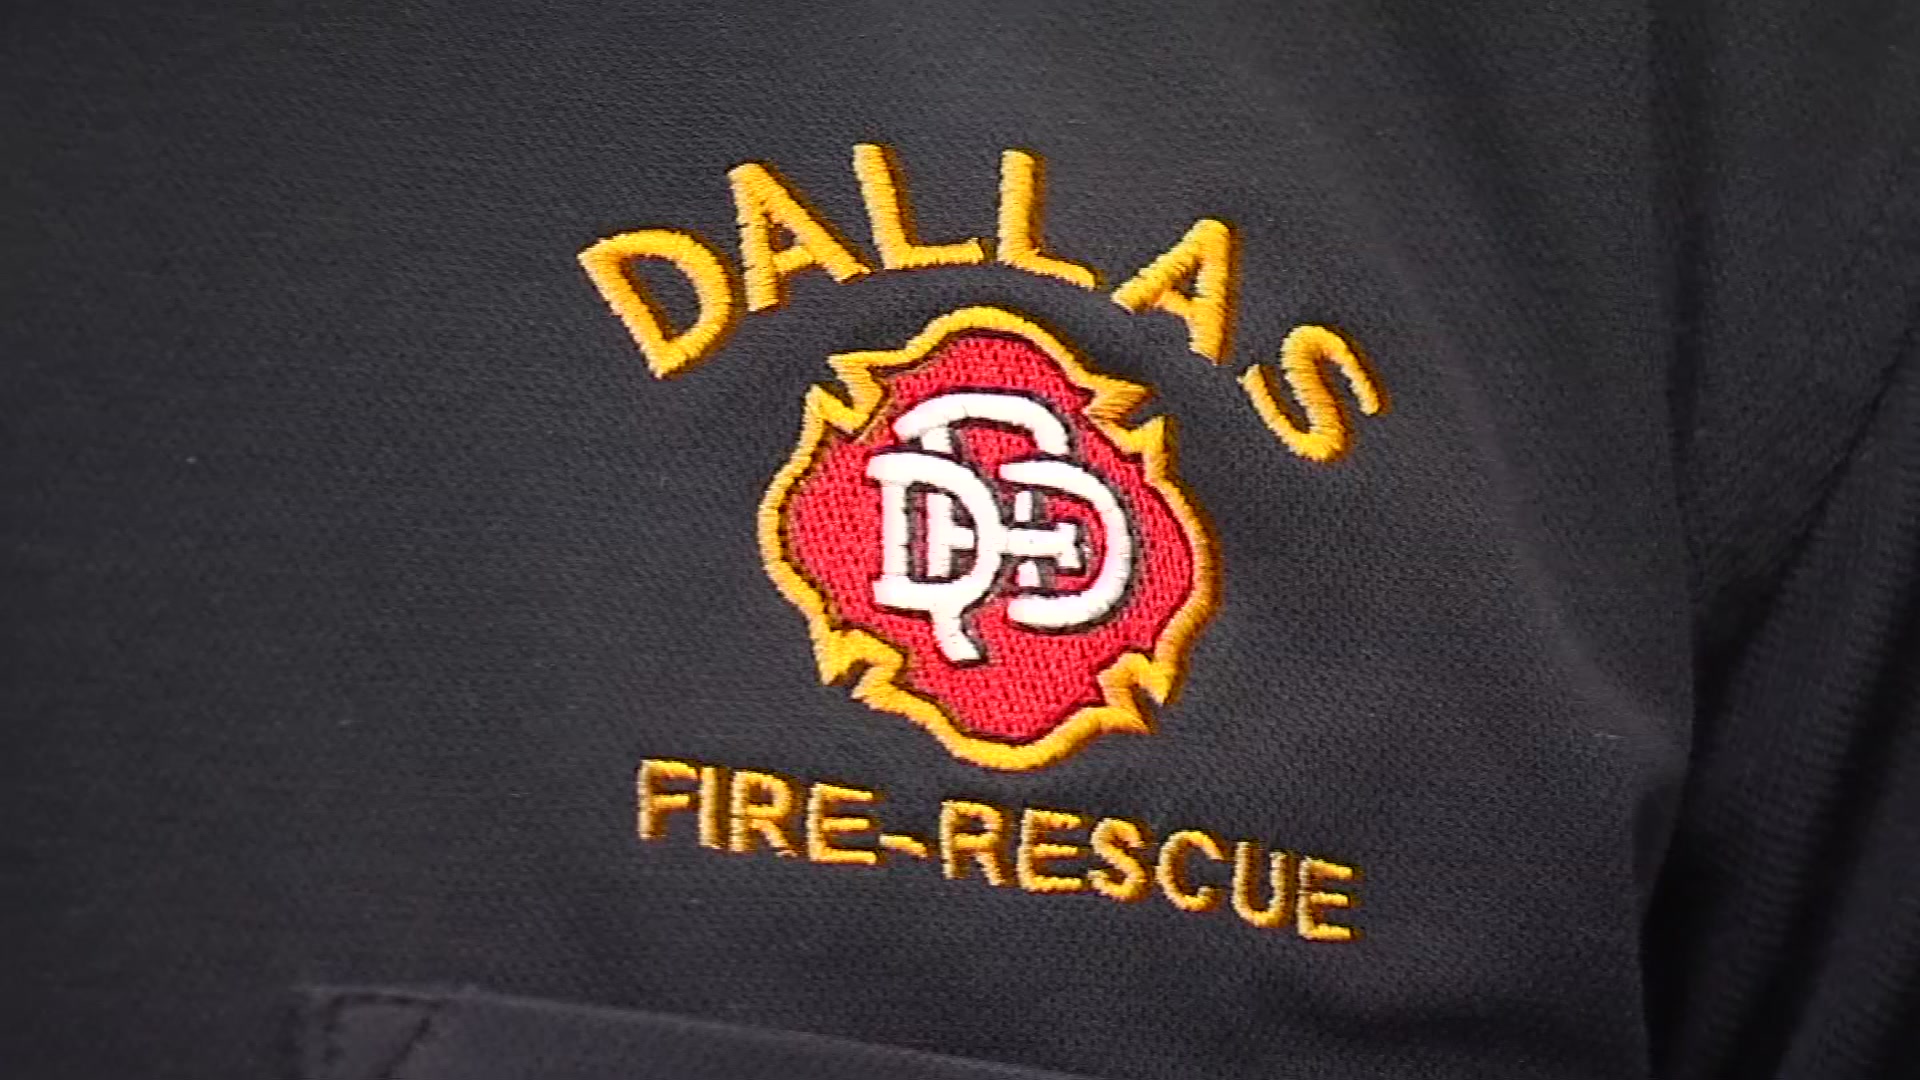 Two run after secondary crash pins man between two vehicles, 2 DFR
employees hurt